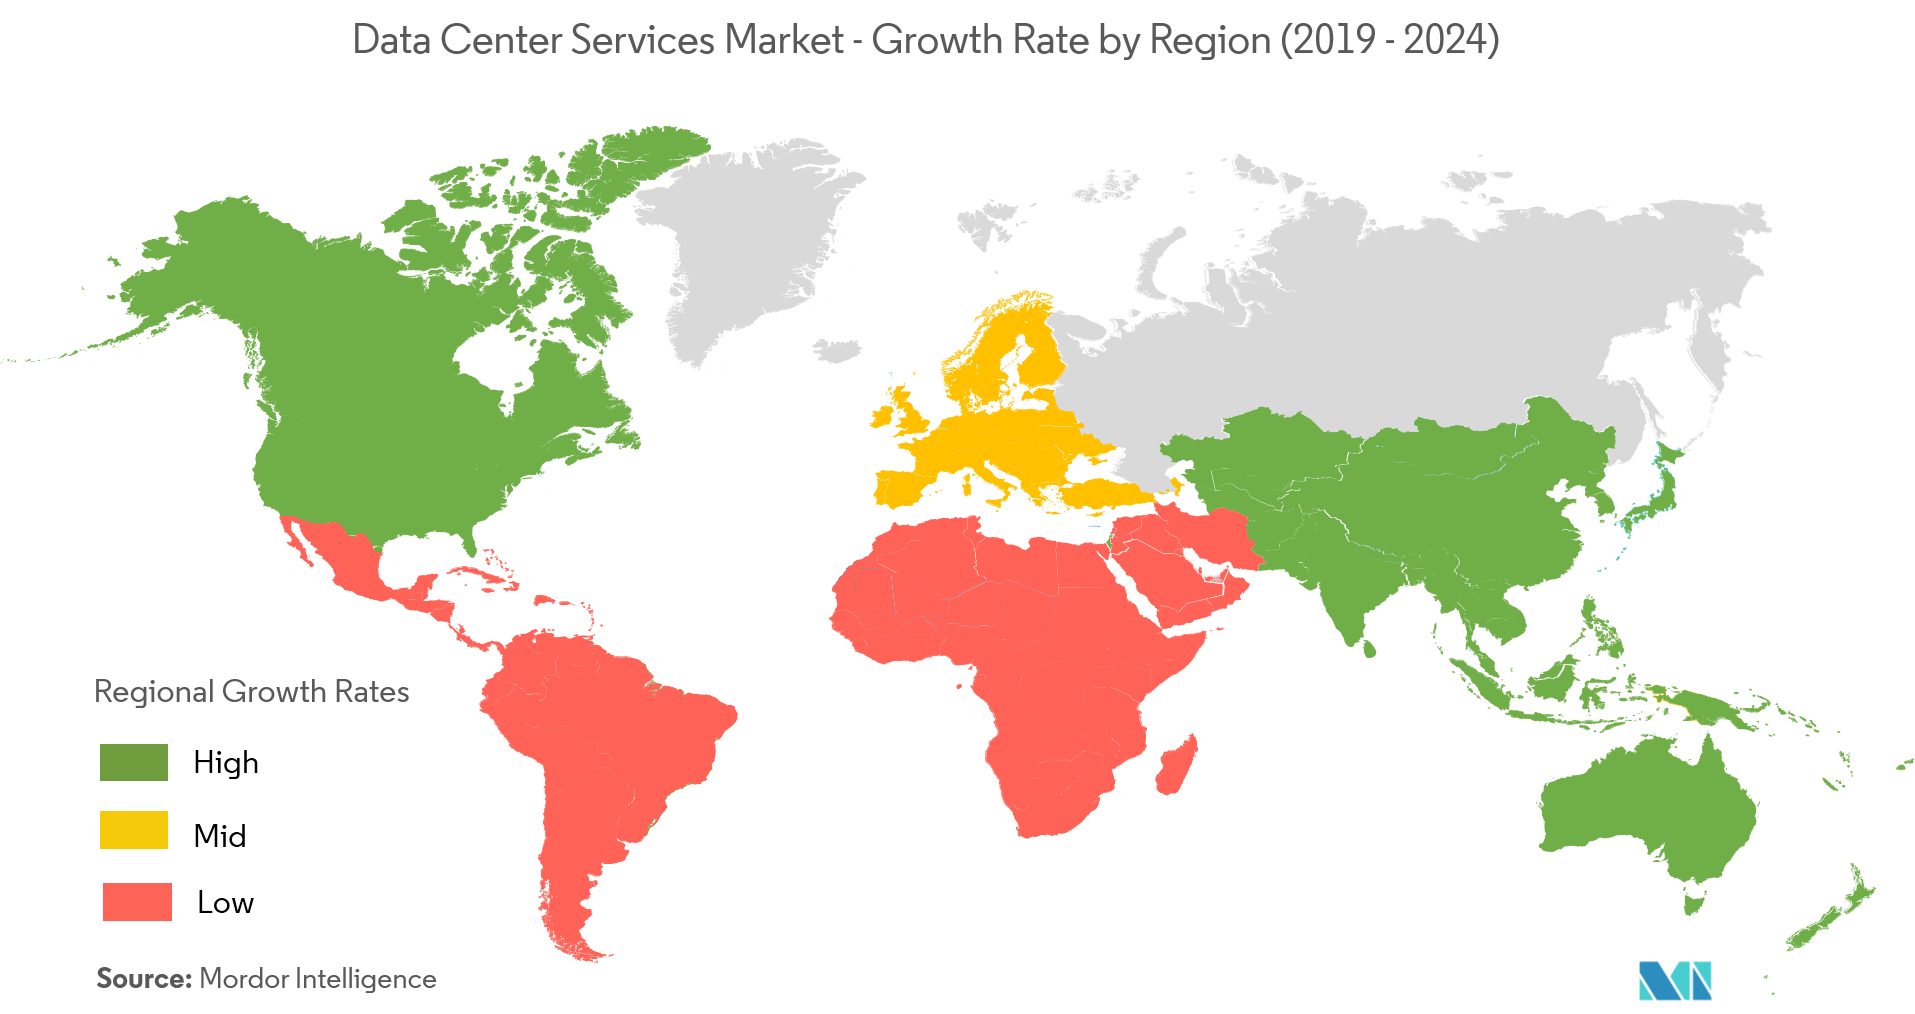 Data Center Services Market - Growth Rate by Region (2019 - 2024)